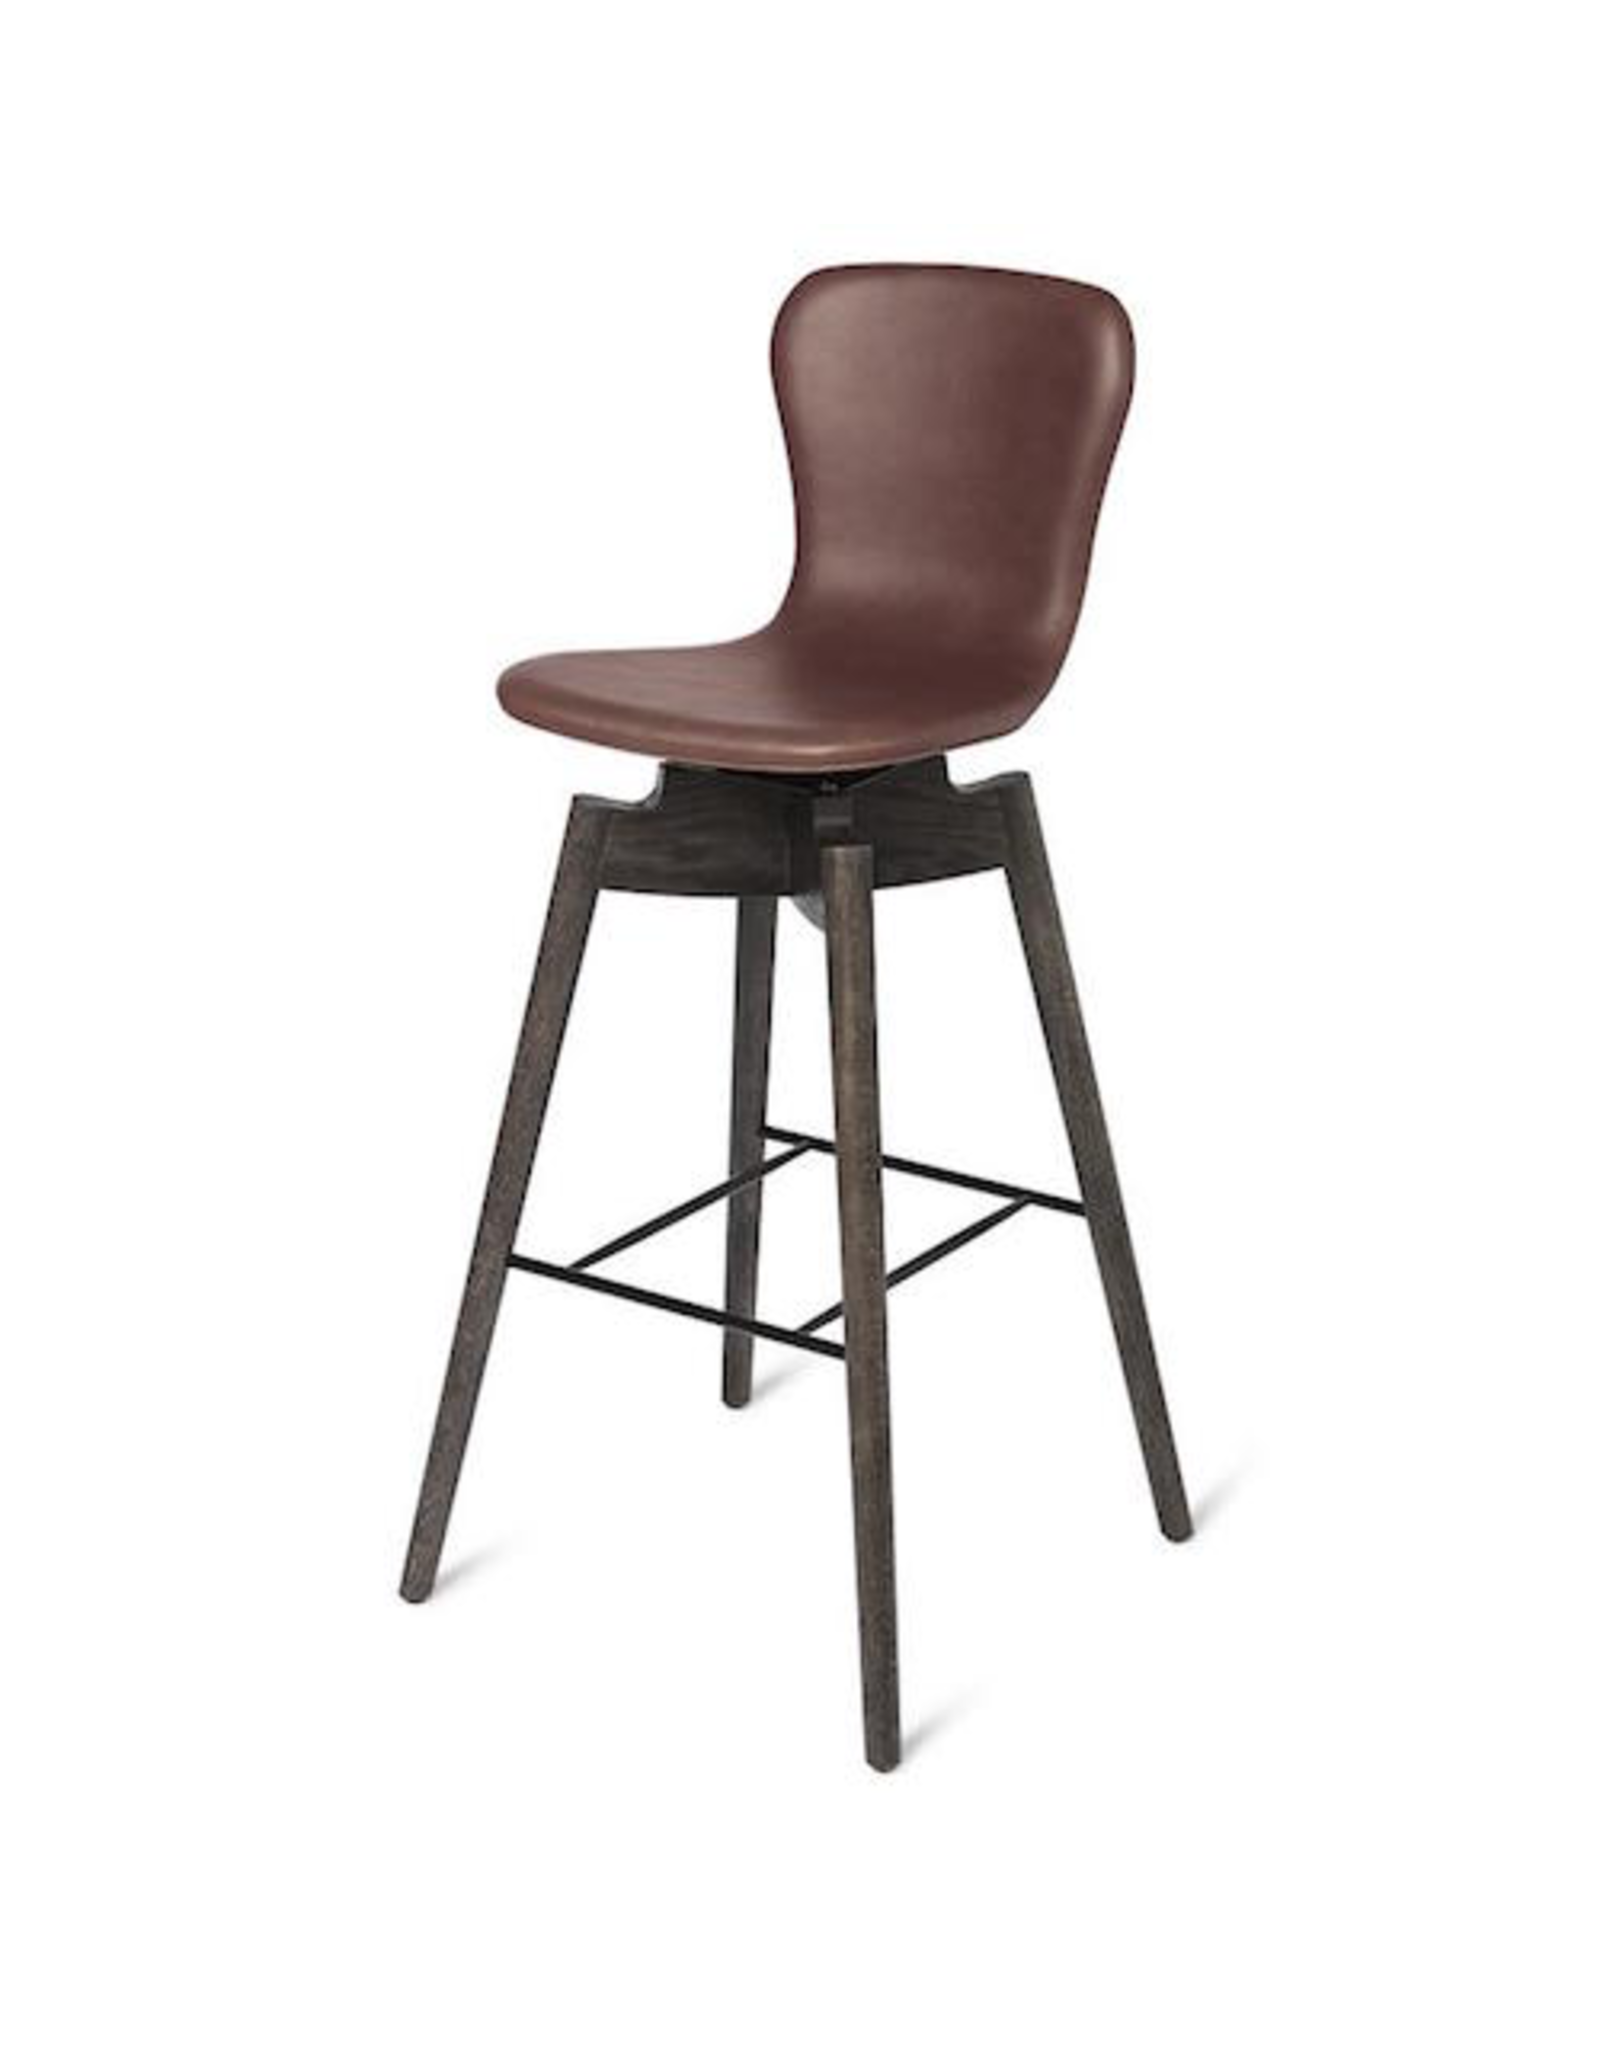 SHELL BARSTOOL IN ULTRA COGNAC LEATHER